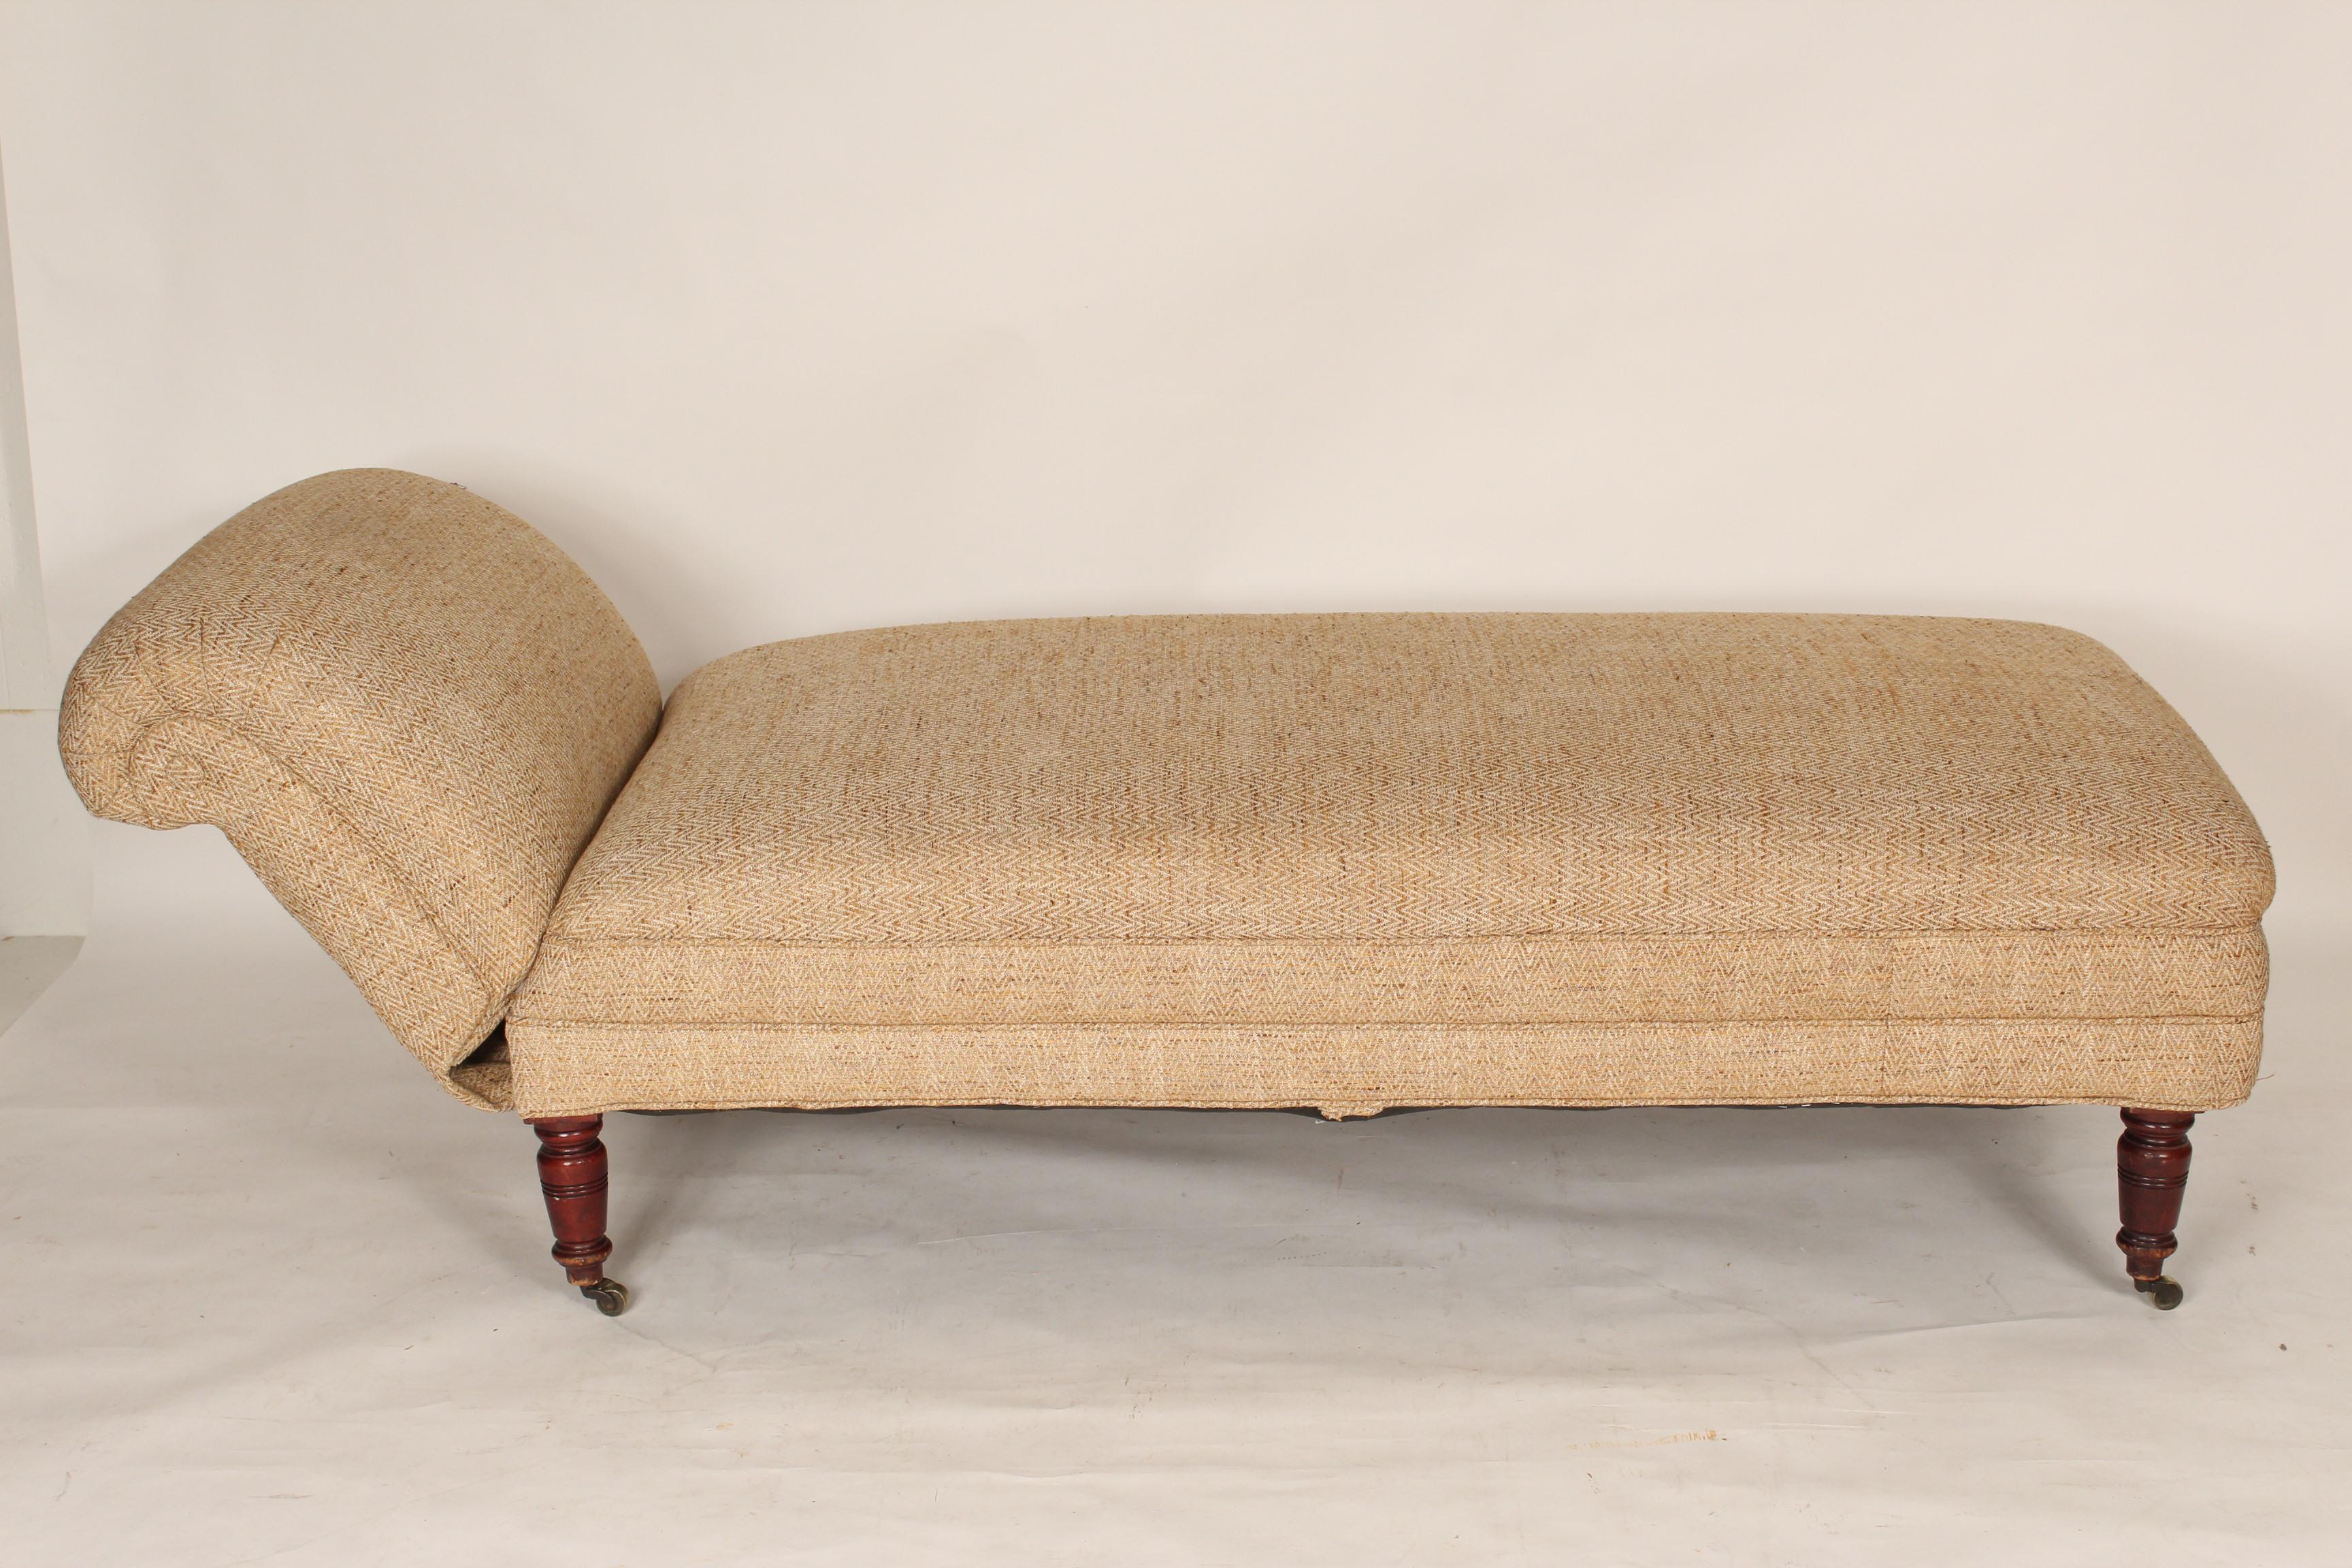 English chaise lounge with an adjustable back, mahogany legs and brass casters, late 19th century. Height of back when raised 26